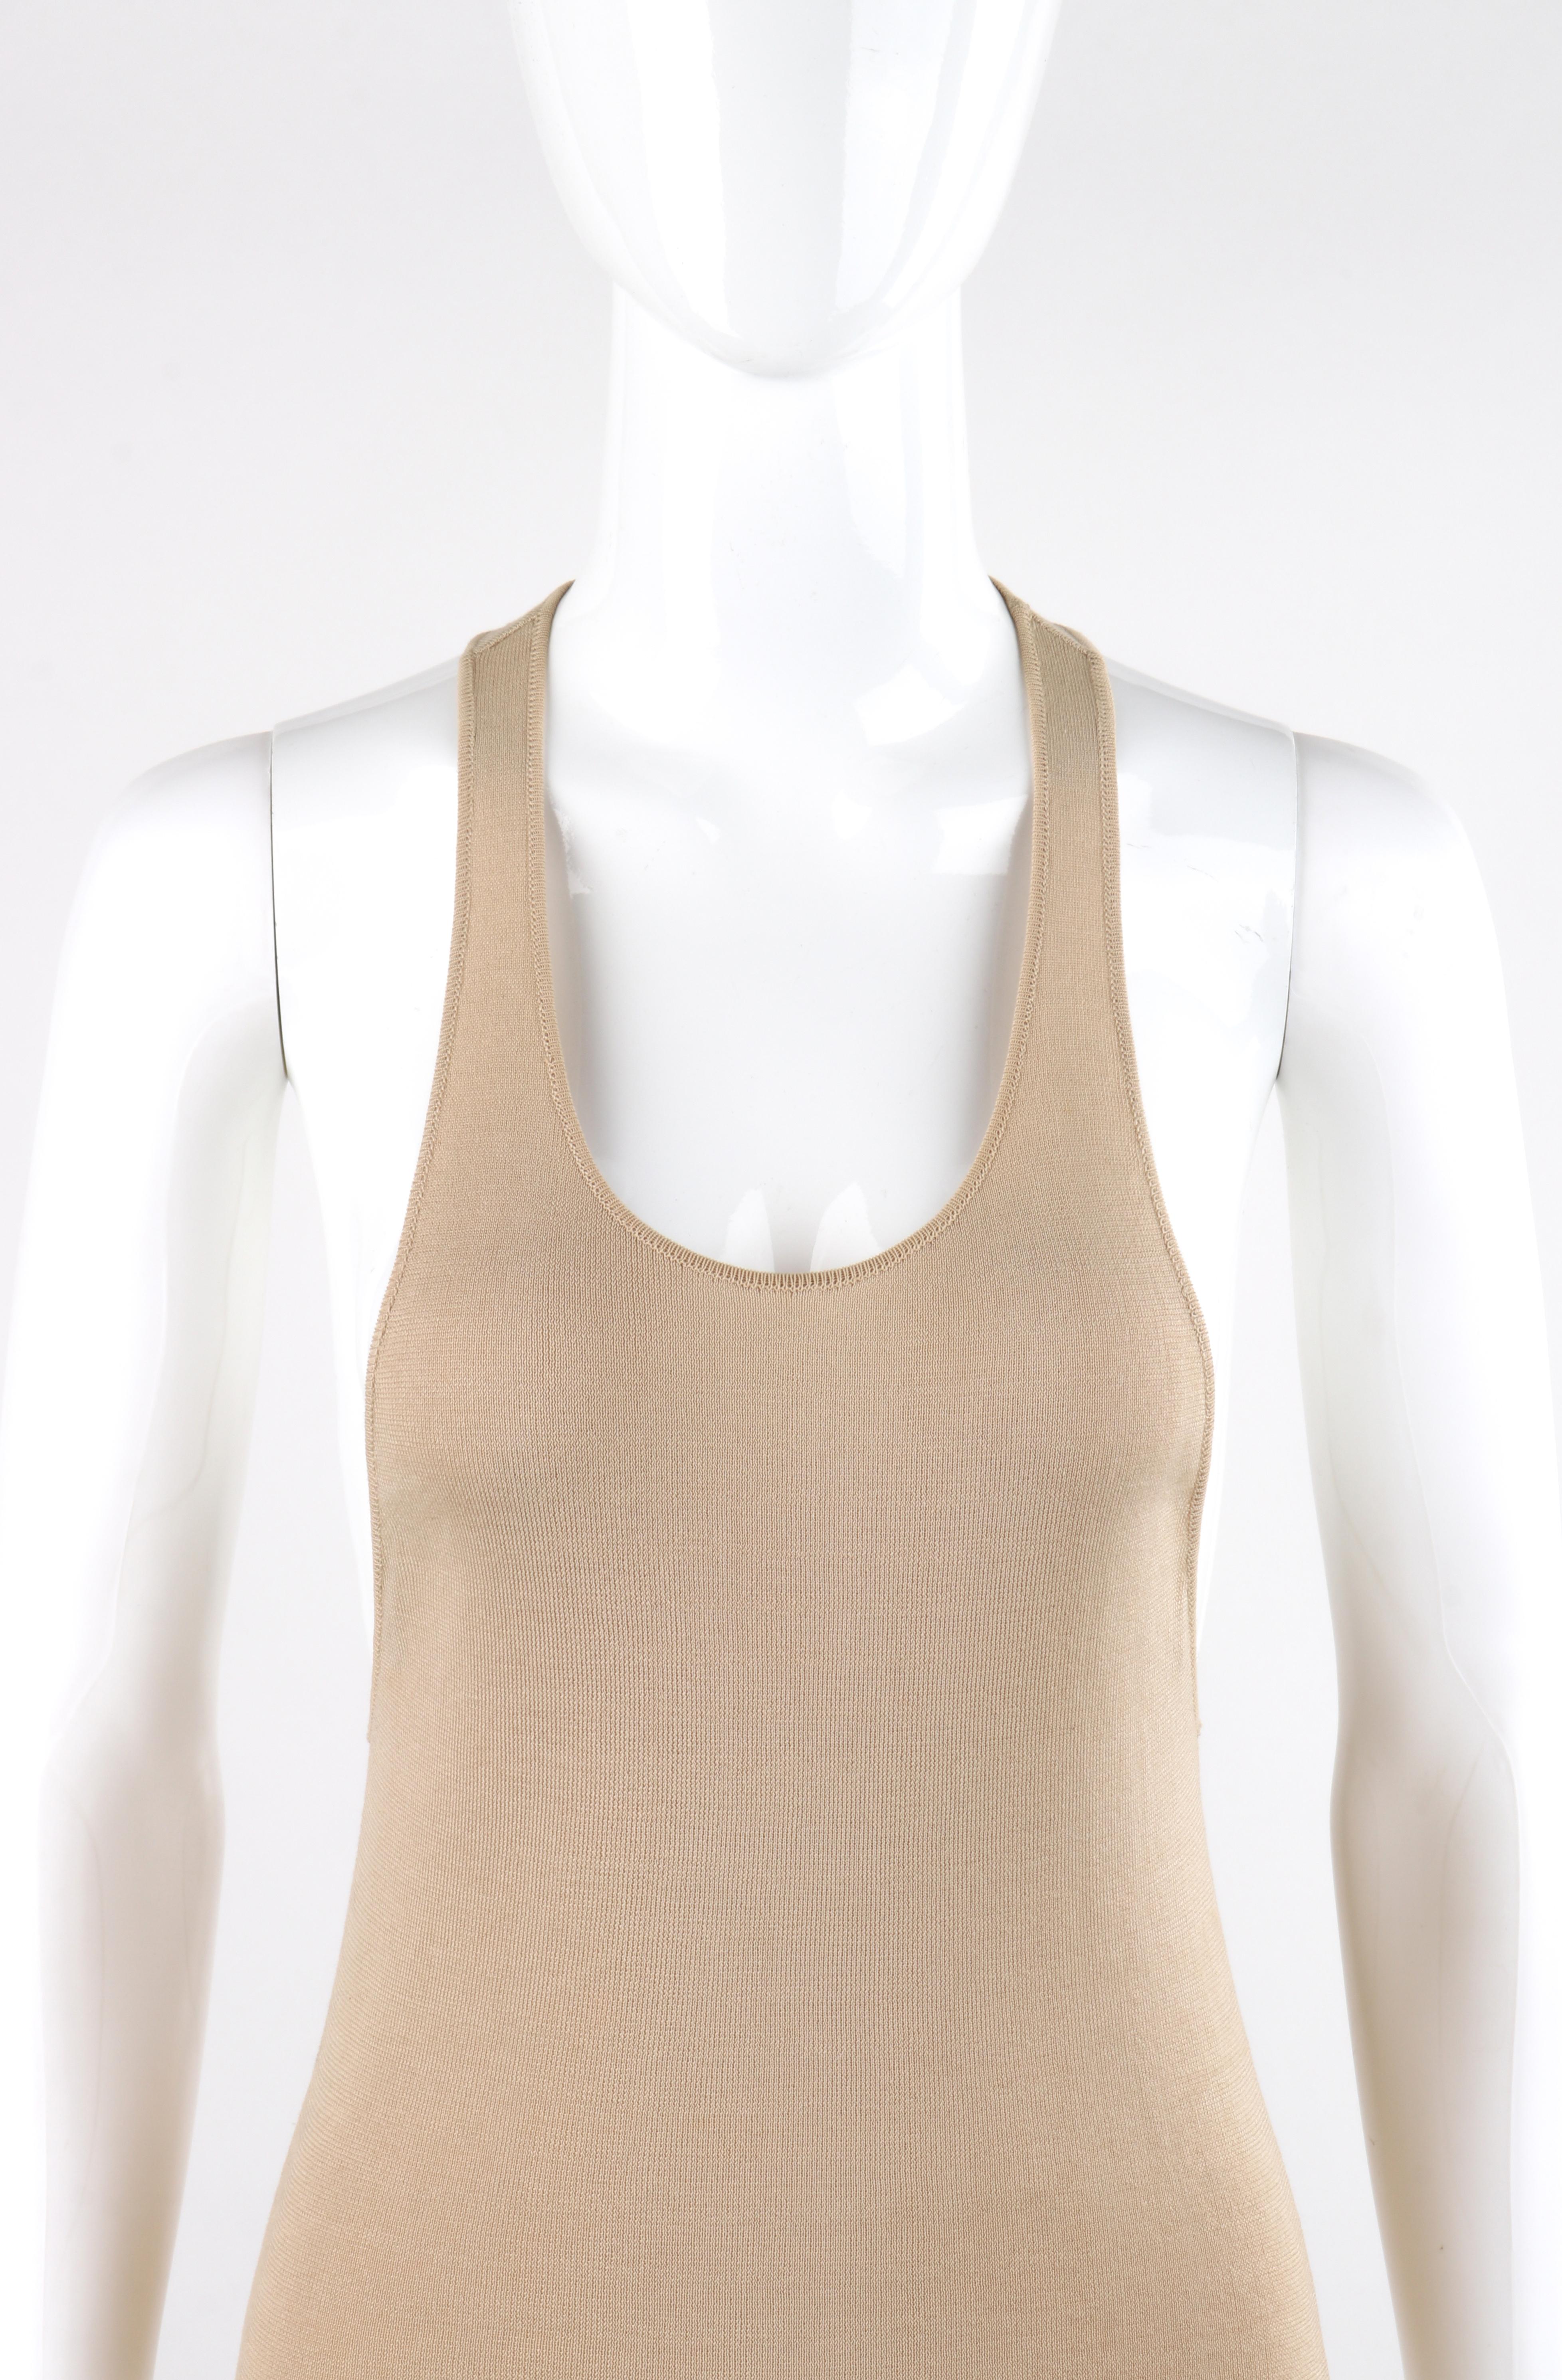 ALEXANDER McQUEEN c.2000’s Tan Scoop Neck Low Cut Side Racerback Knit Tank Top
 
Brand / Manufacturer: Alexander McQueen
Circa: 2000’s 
Designer: Alexander McQueen
Style: Sleeveless knit racerback top
Color(s): Tan
Lined: No
Unmarked Fabric Content